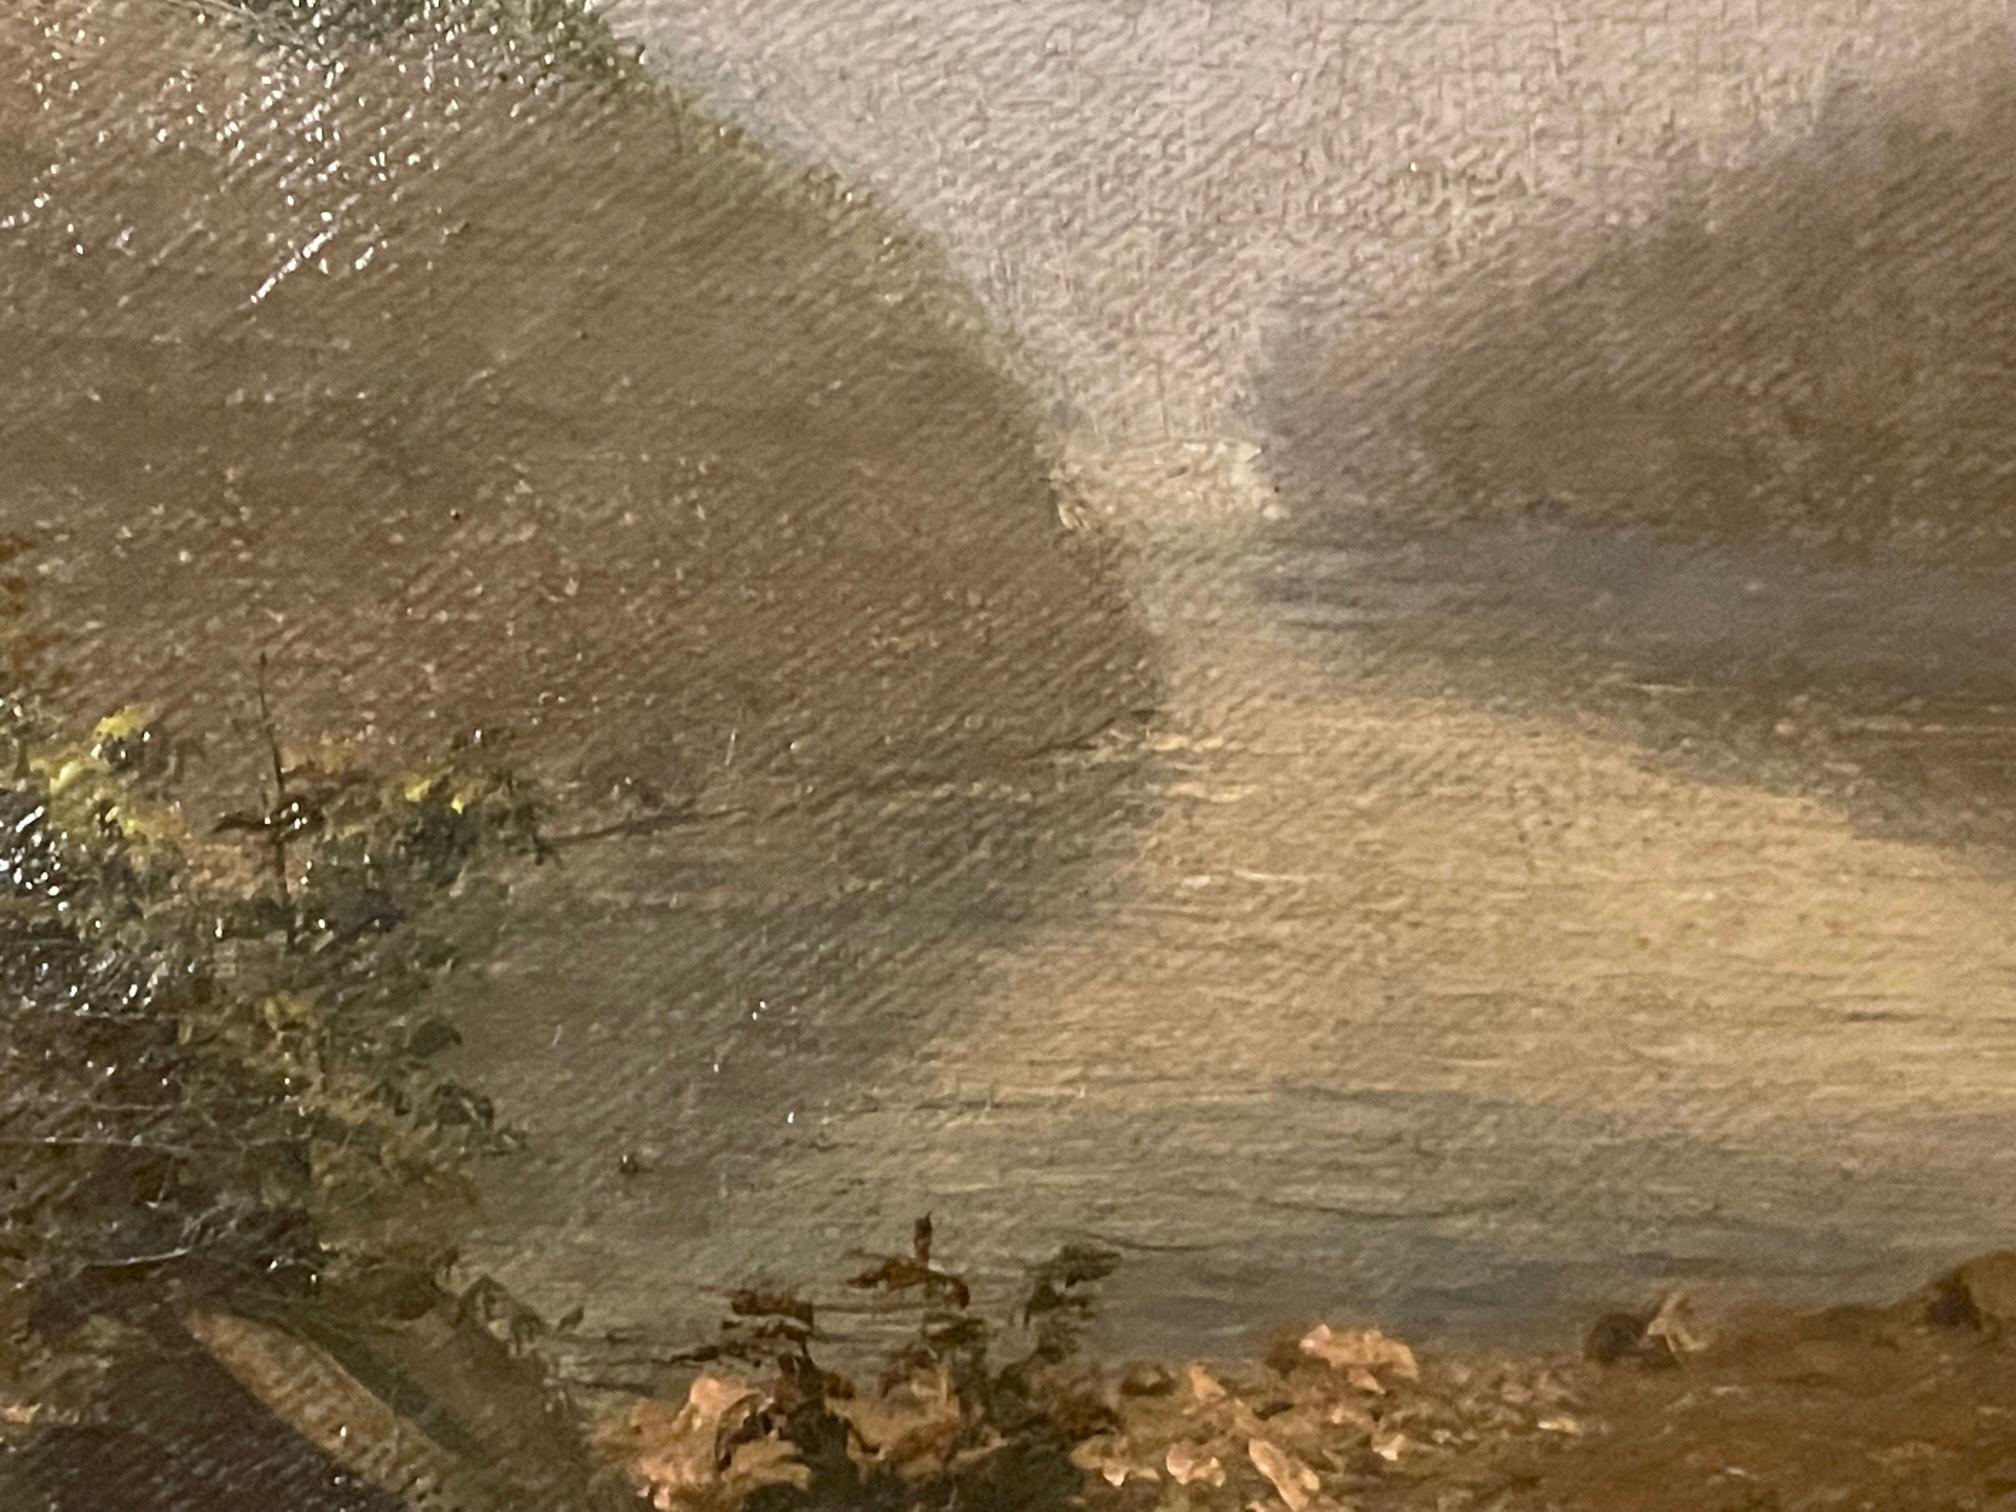 The technique of American Tonalism is evident in this oil painting on canvas from the early 20th century/late 19th century.  Hues of  muted greys create the atmospheric mood of dusk on the hills and river. Tonalism is all about working with tones